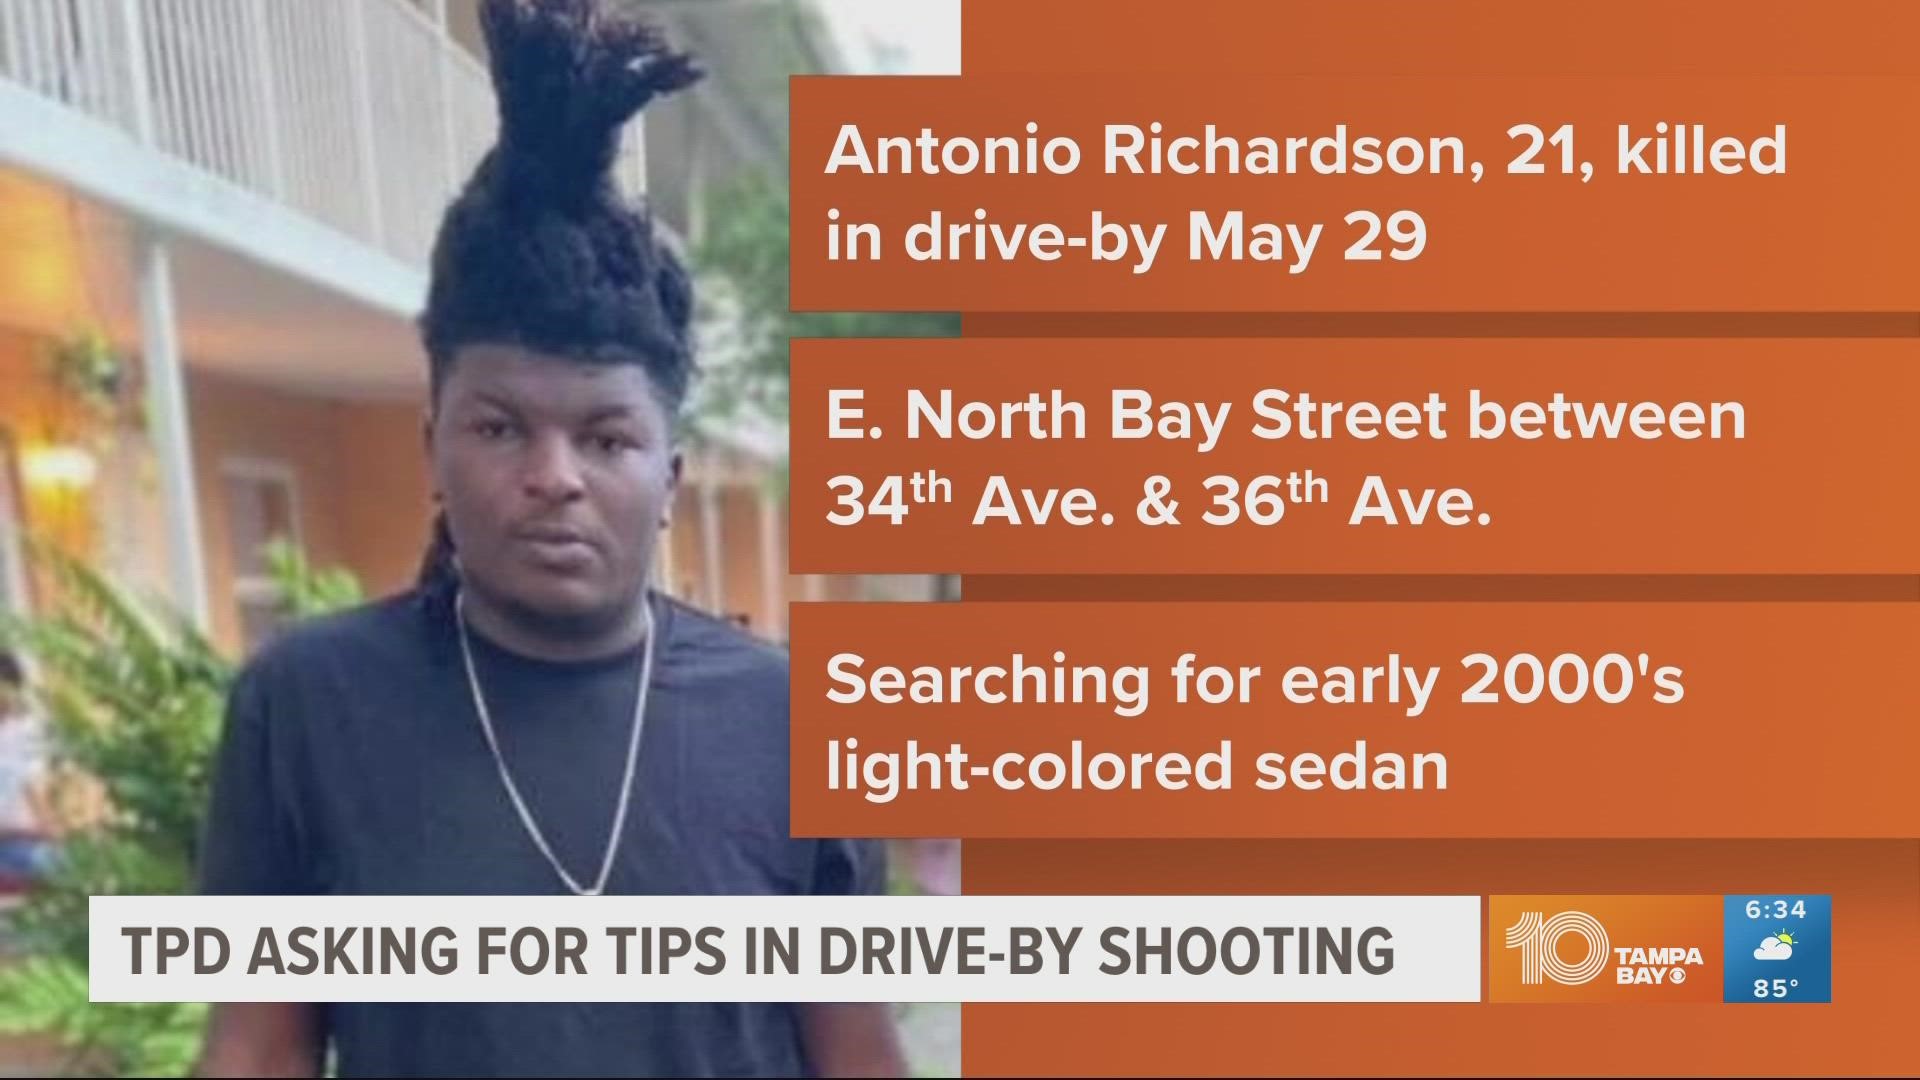 Antonio Richardson was only 21 years old when he was shot and killed this spring in Tampa.